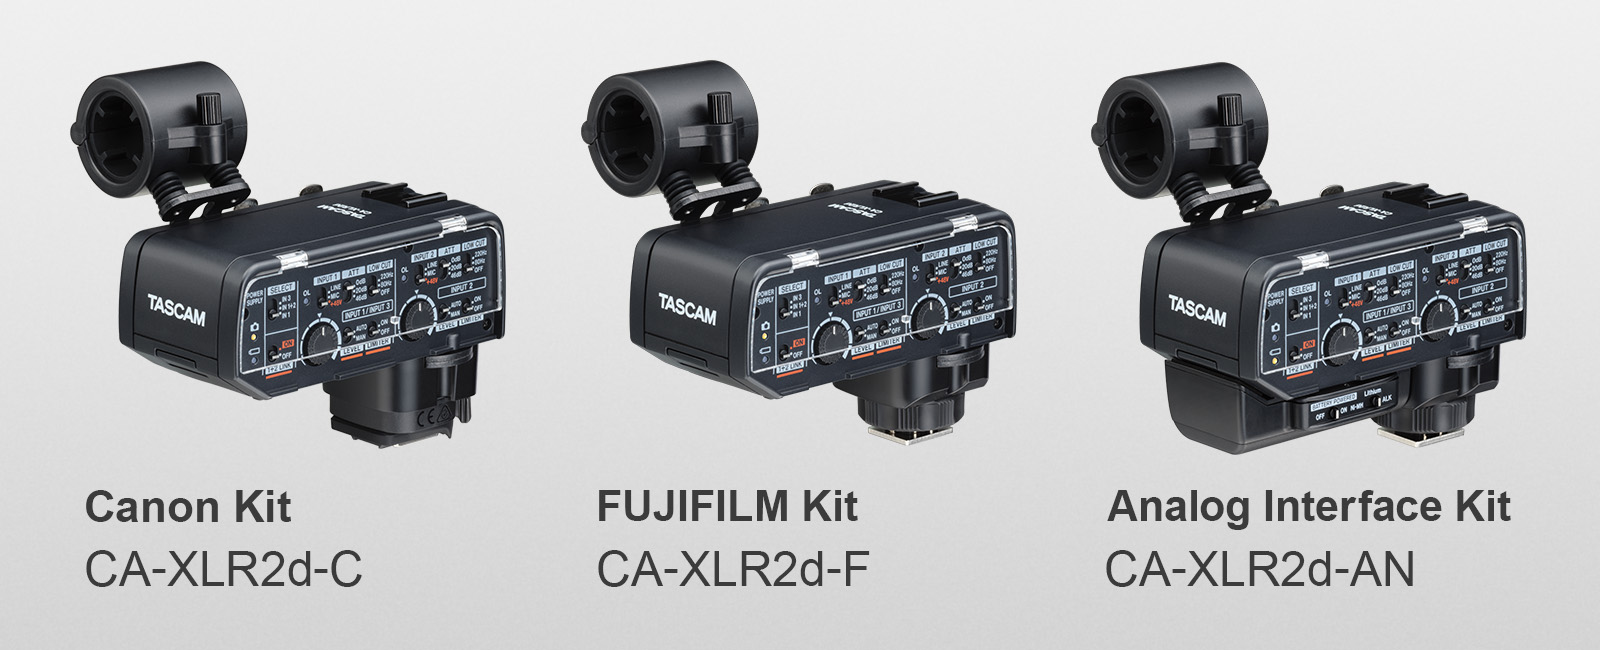 CA-XLR2d - New Upgraded Version 1.11 of Firmware Released & Tested cameras list Updated